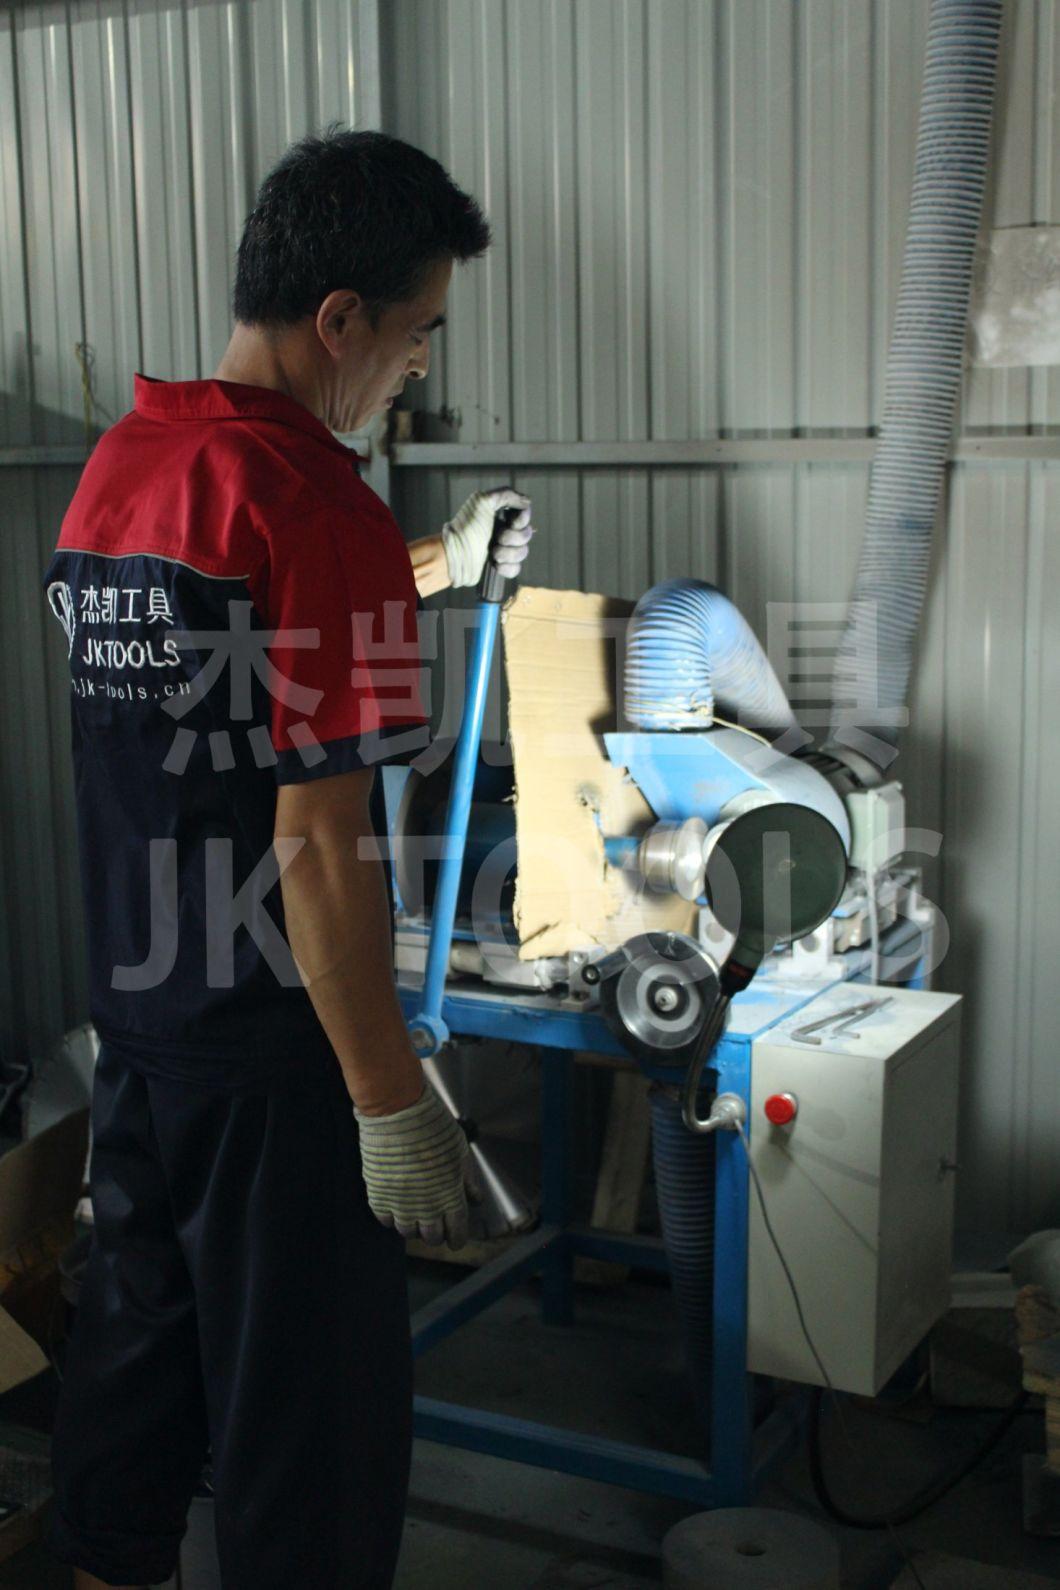 in Stock Durable Continuous Diamond Grinding Cup Wheel for Granite